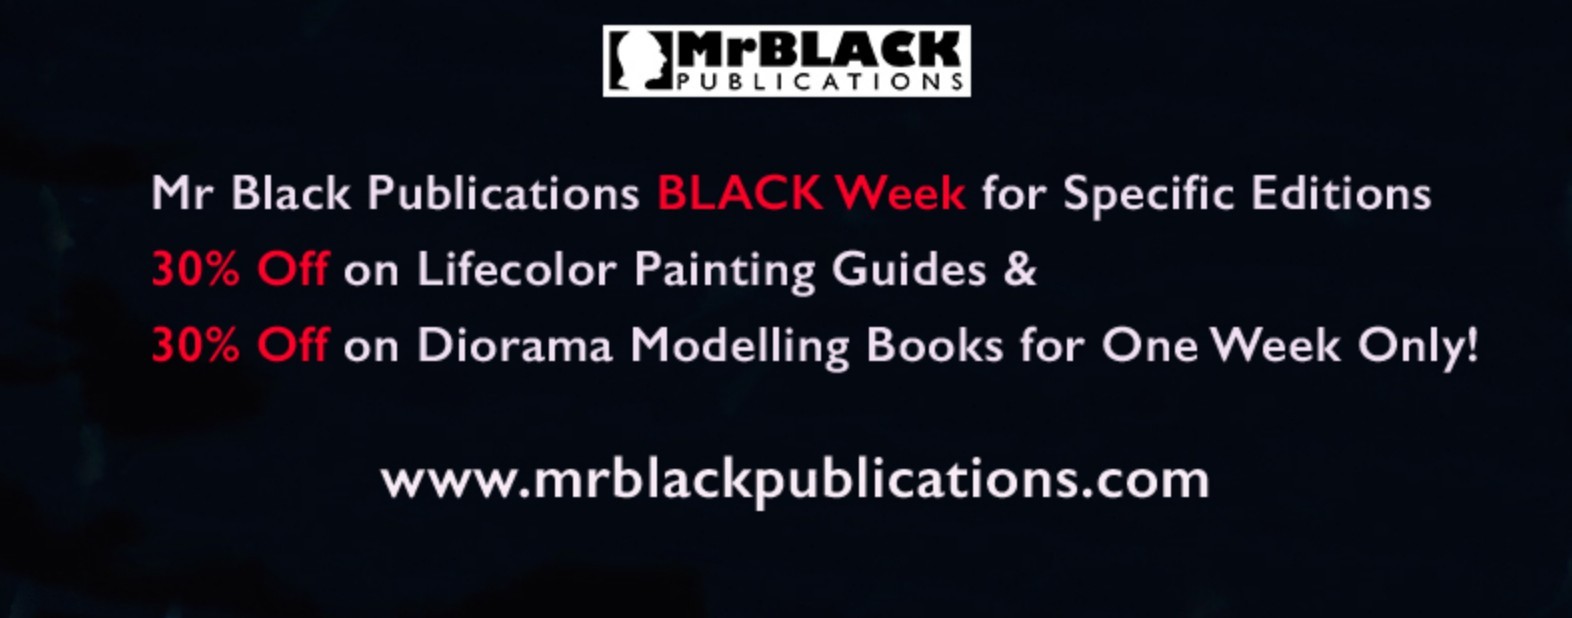 30% Off on Diorama Modelling and Lifecolor Painting Guides - Black Week